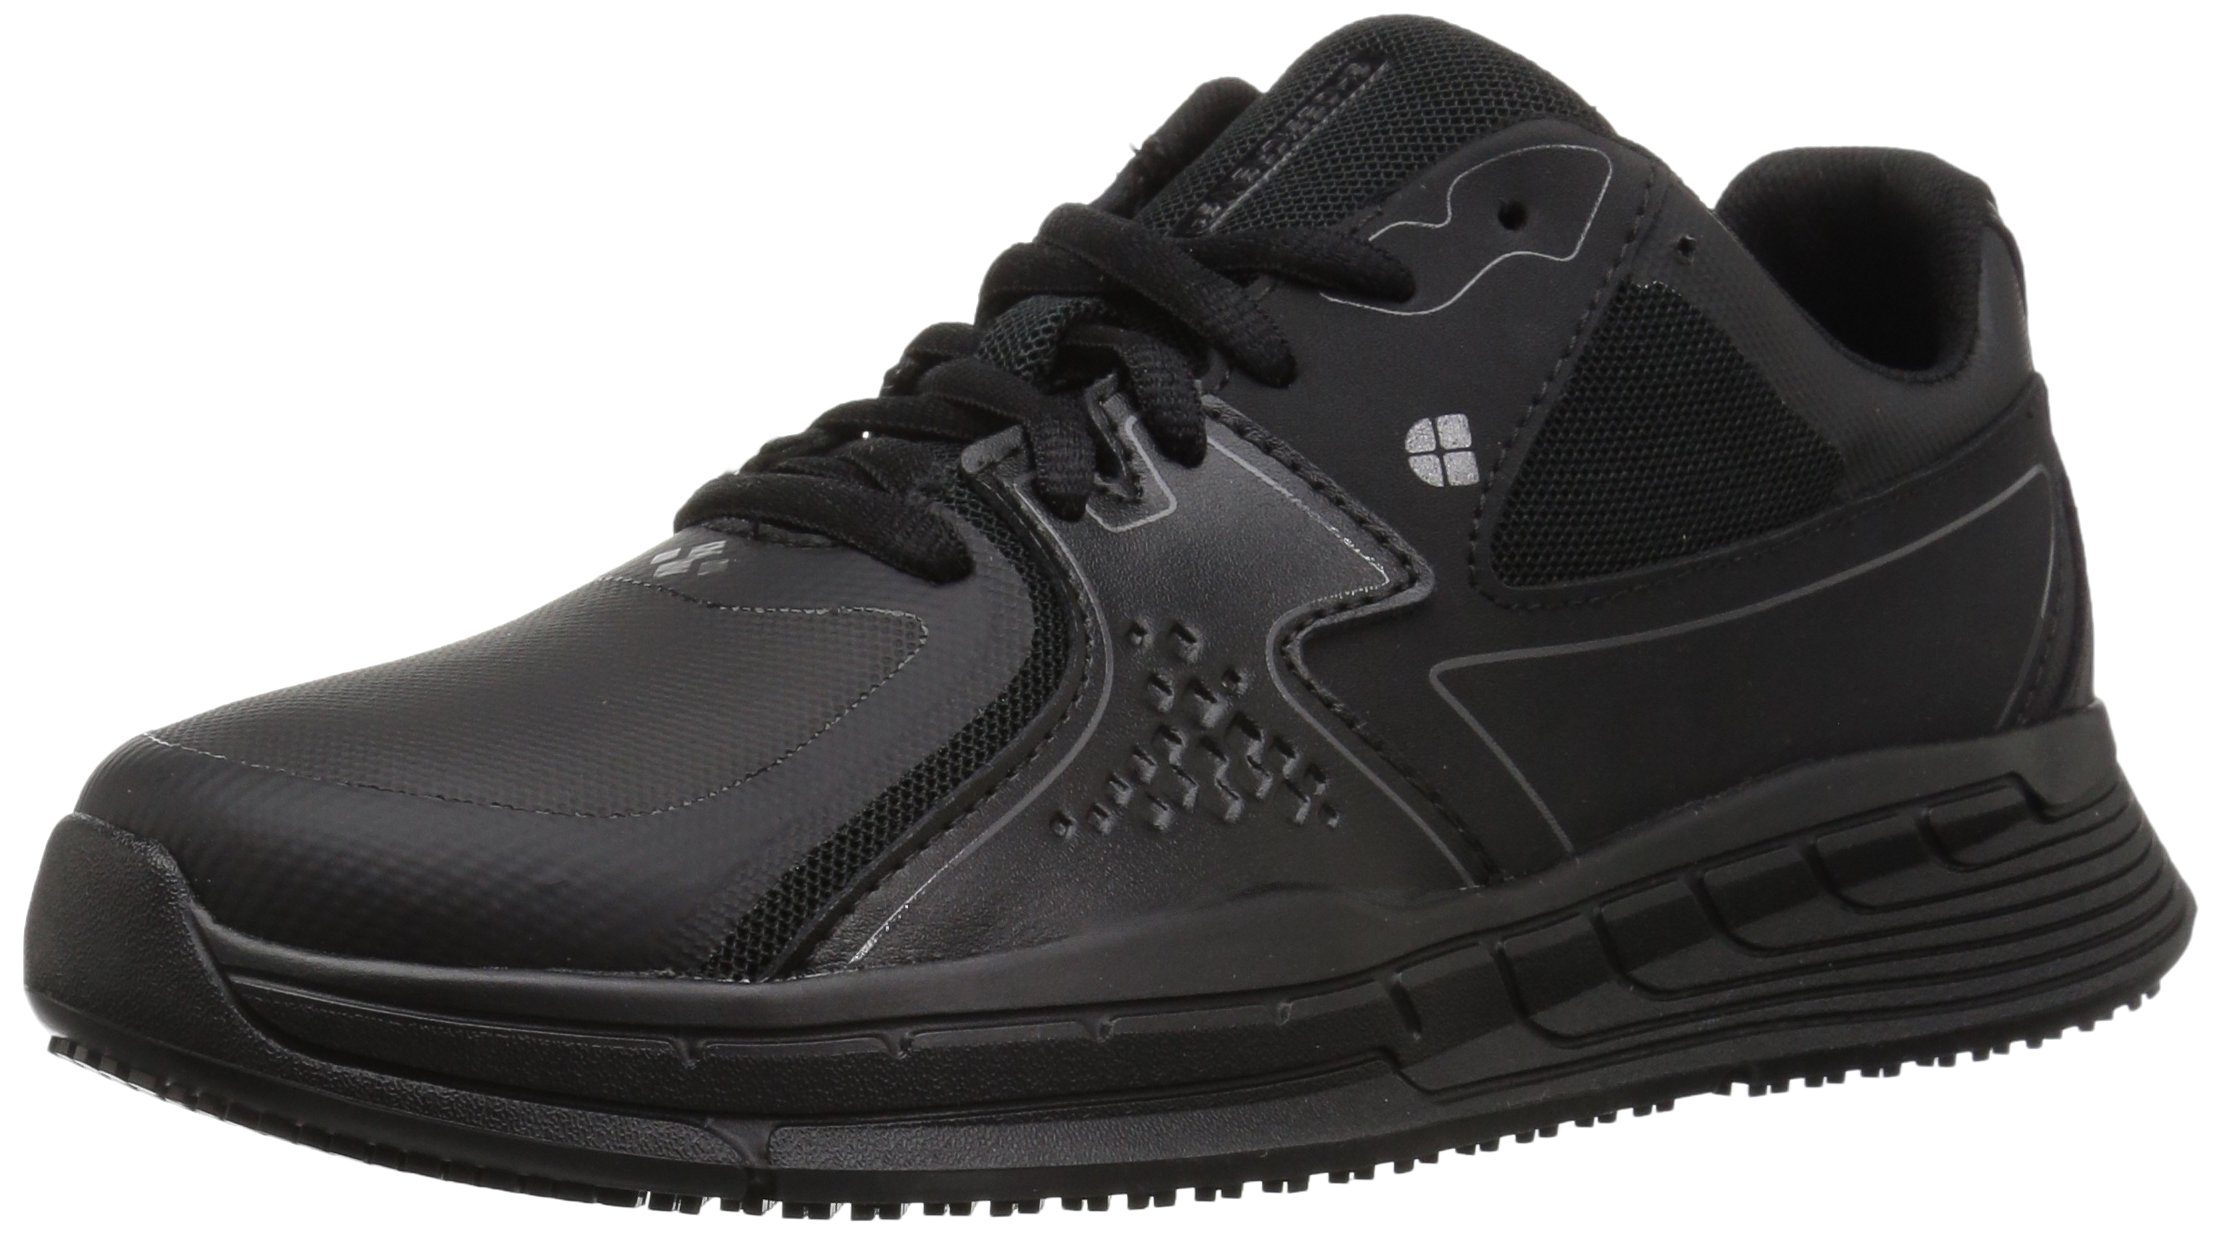 Shoes for Crews Condor and Condor II Men's Work Shoes, Slip Resistant, Water Resistant, Black, Multiple Size Options